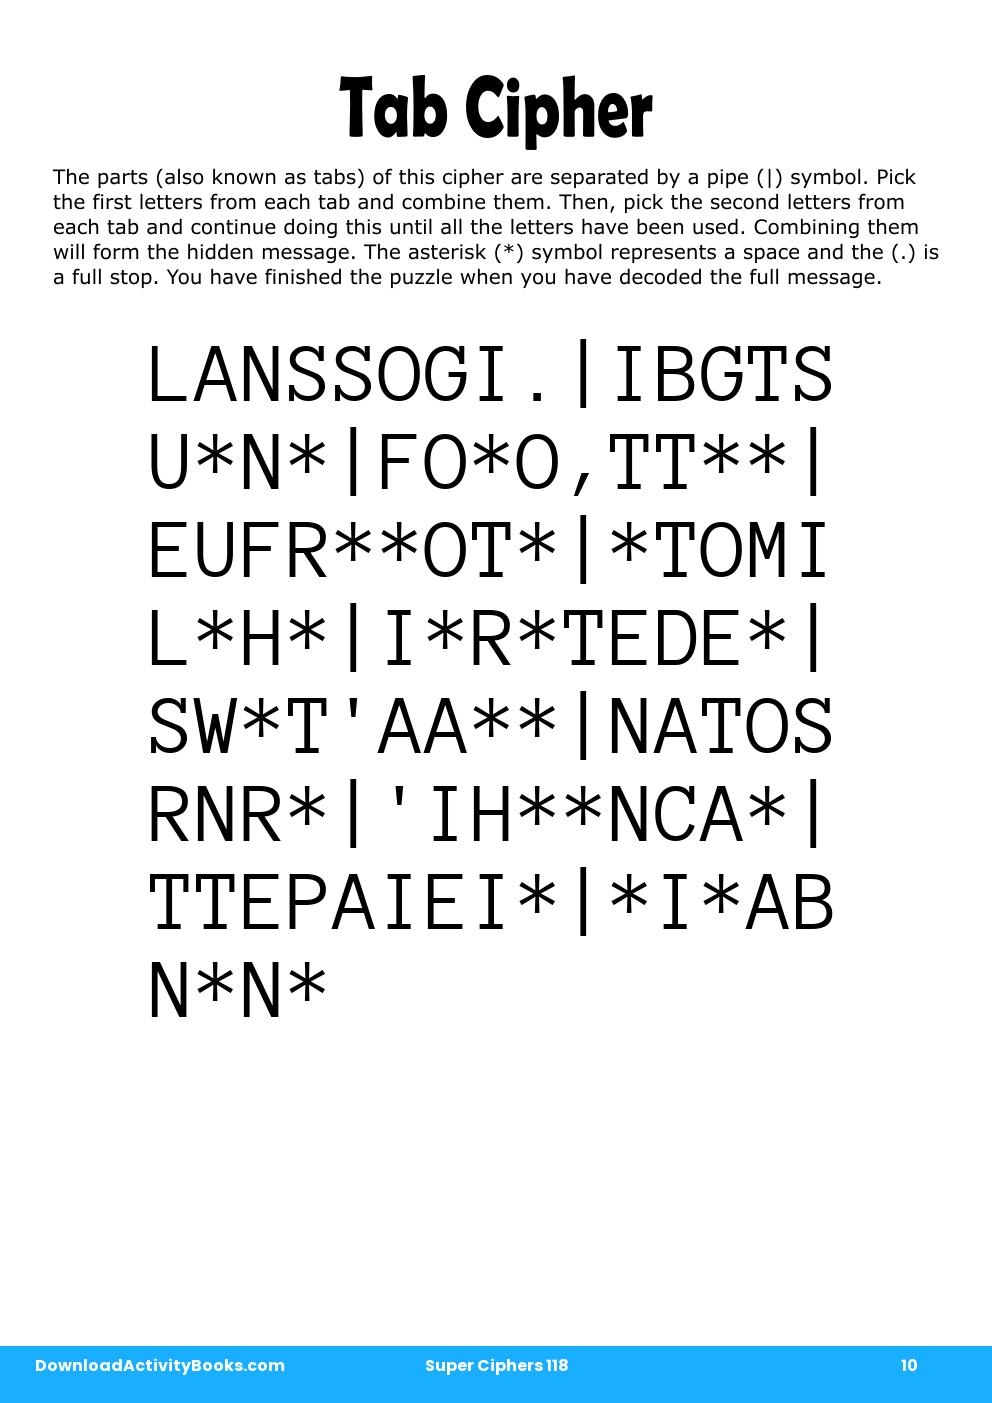 Tab Cipher in Super Ciphers 118